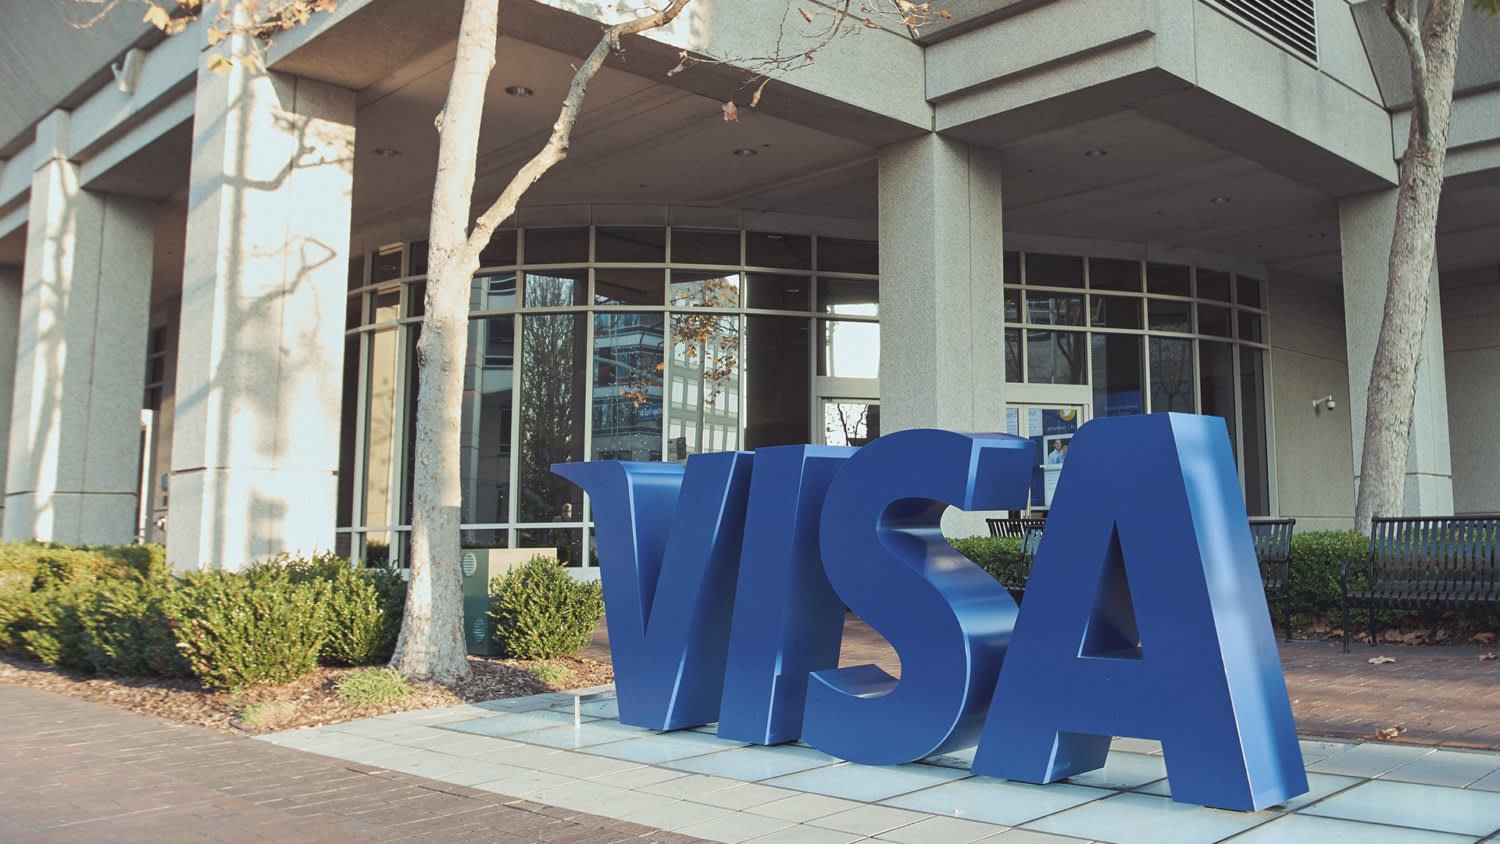 Visa now settles payments in USDC stablecoin on Ethereum blockchain